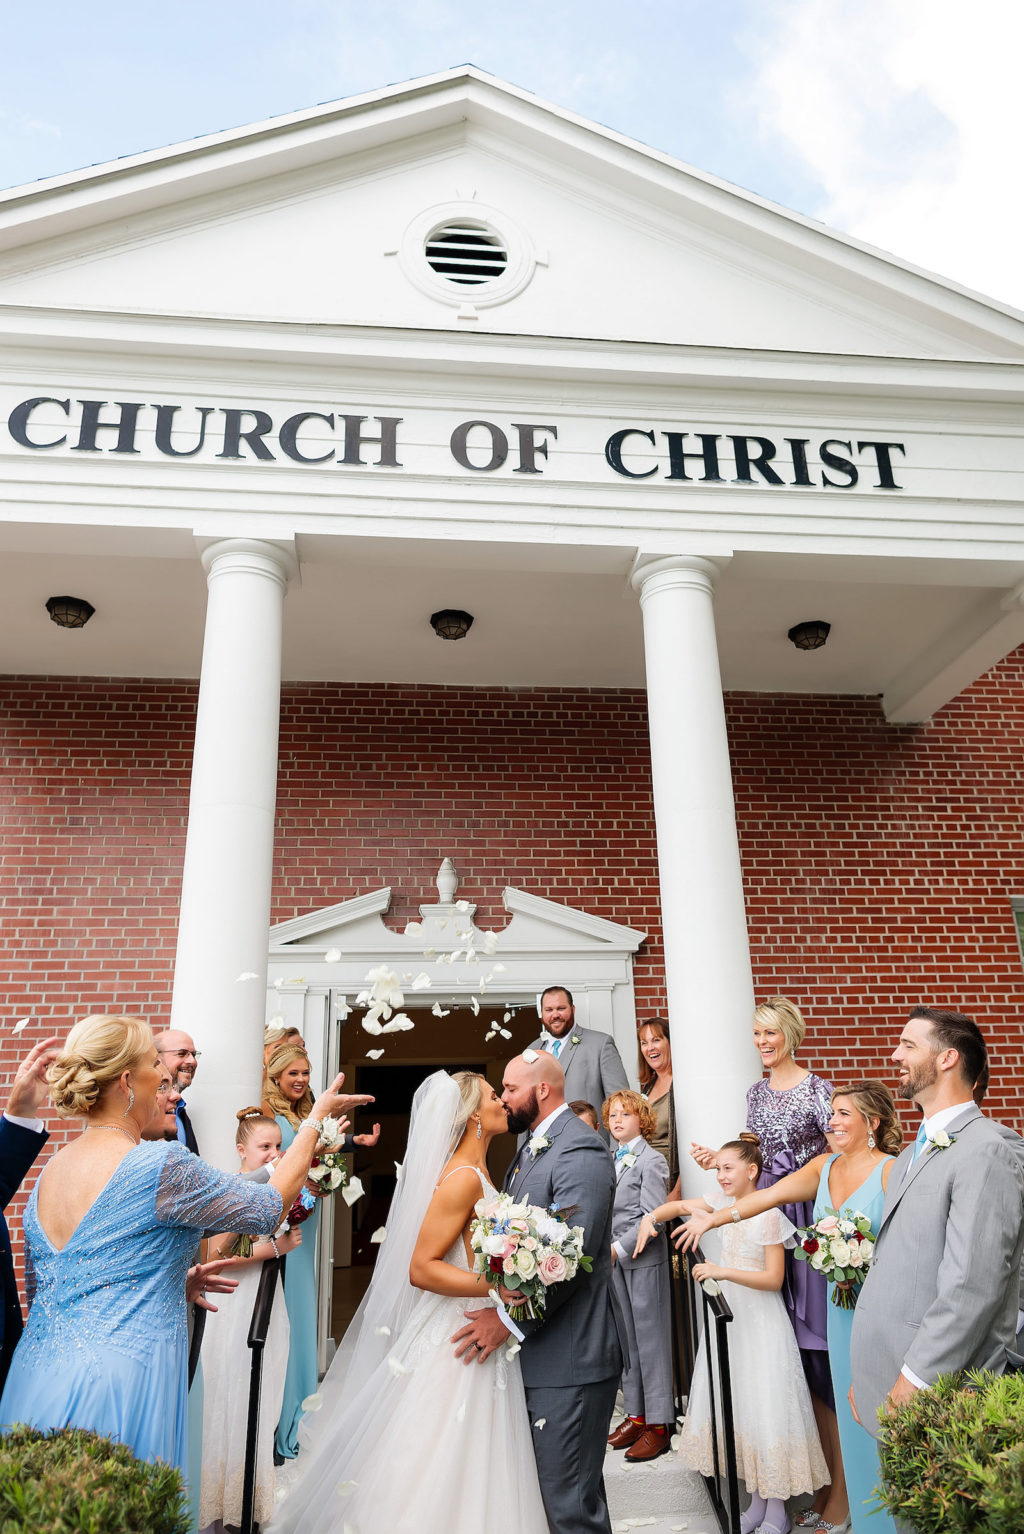 Bride and Groom Rose Petal Ceremony Exit Send Off at Traditional Tampa Church Wedding Ceremony | Henderson Boulevard Church of Christ Red Brick Church with White Columns